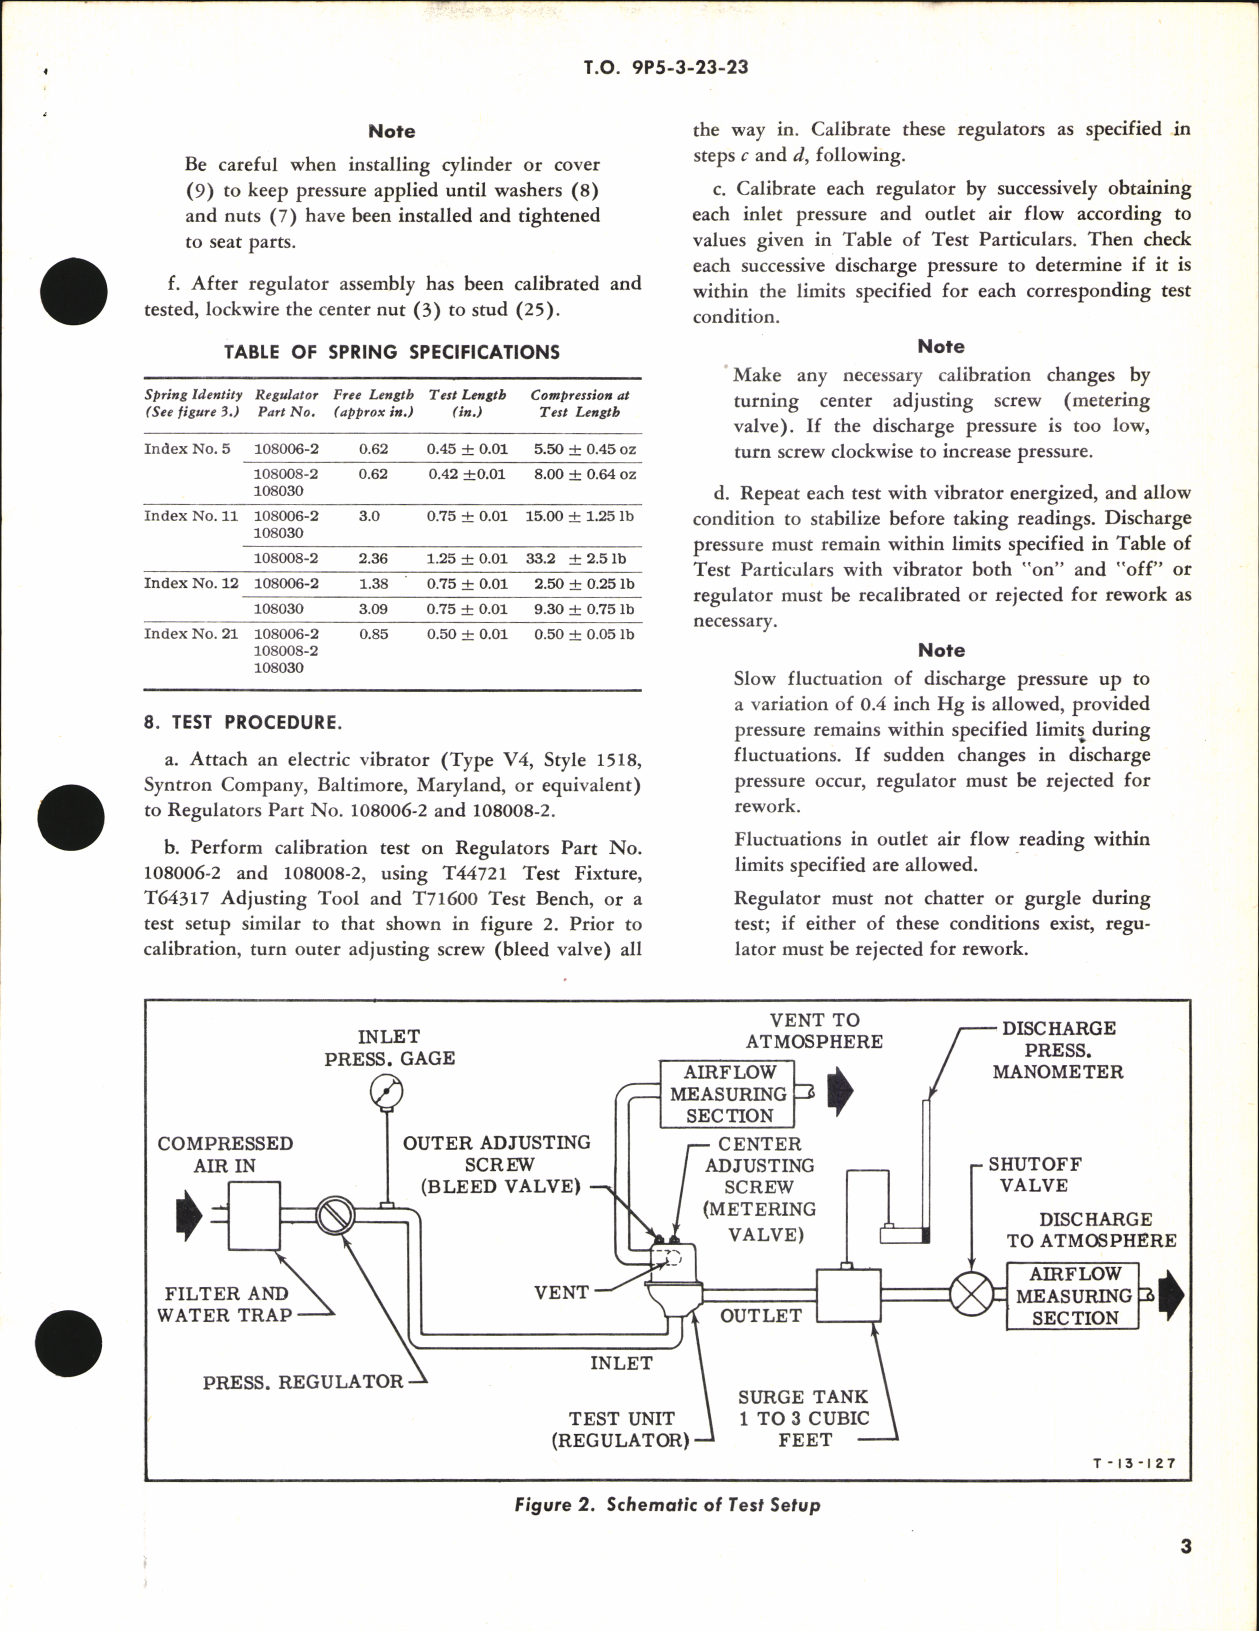 Sample page 3 from AirCorps Library document: Overhaul Instructions with Parts breakdown for Differential Air Pressure Regulators 